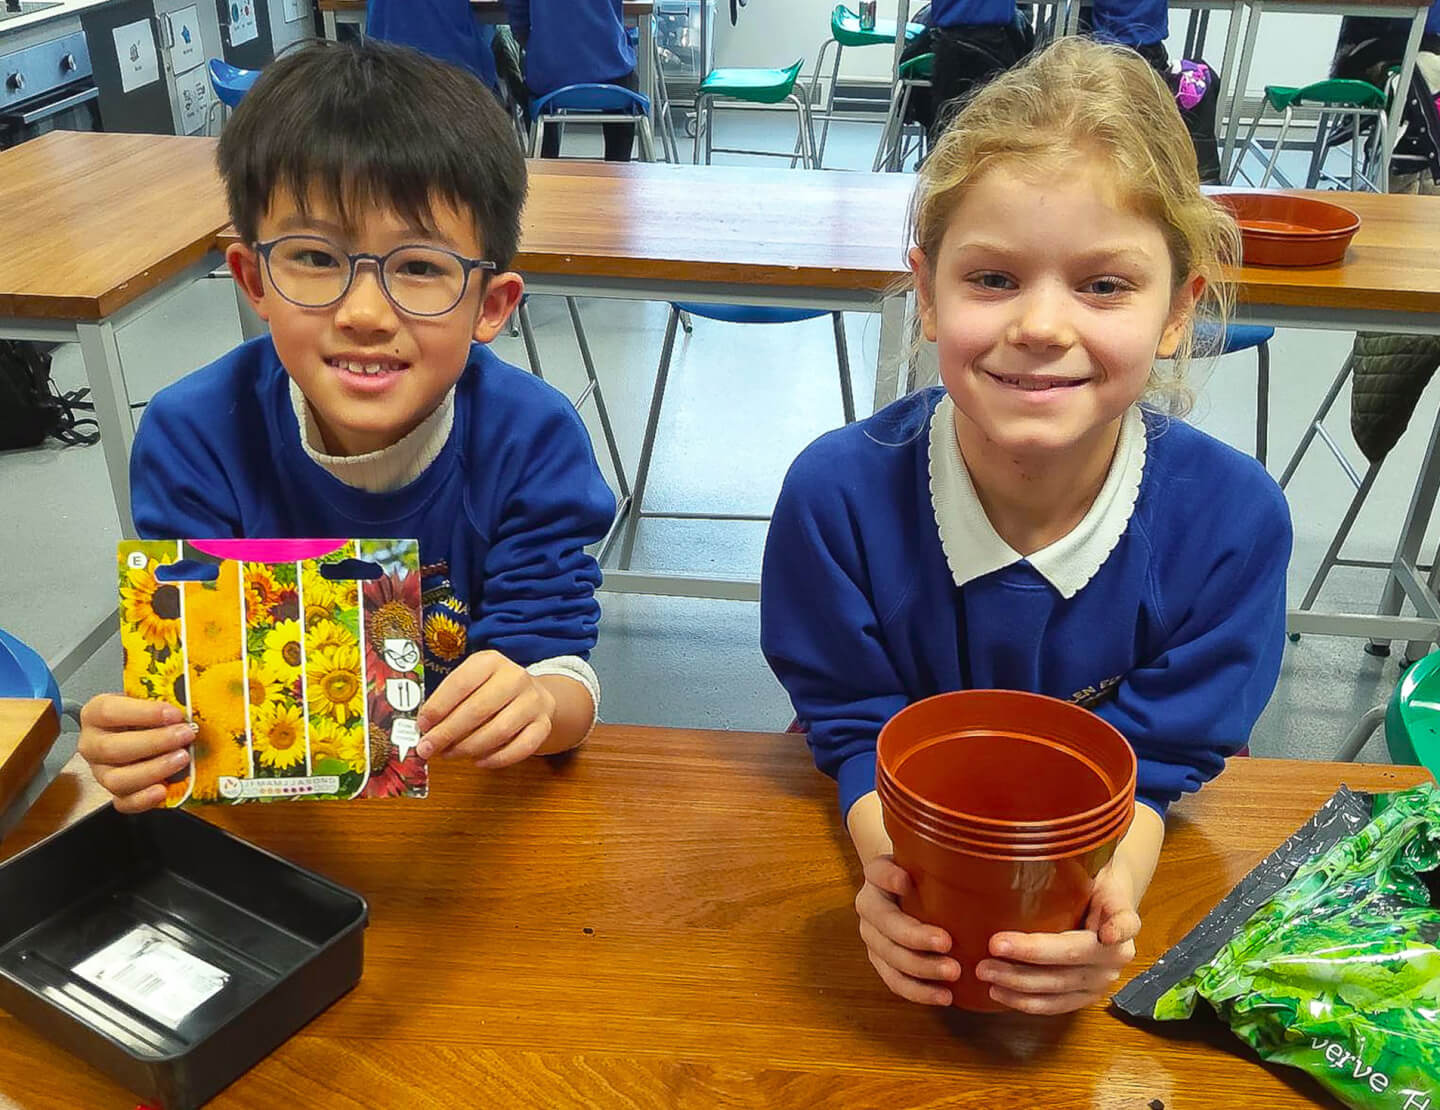 A photo of 2 children holding a plant pot and some seeds to get ready to plant